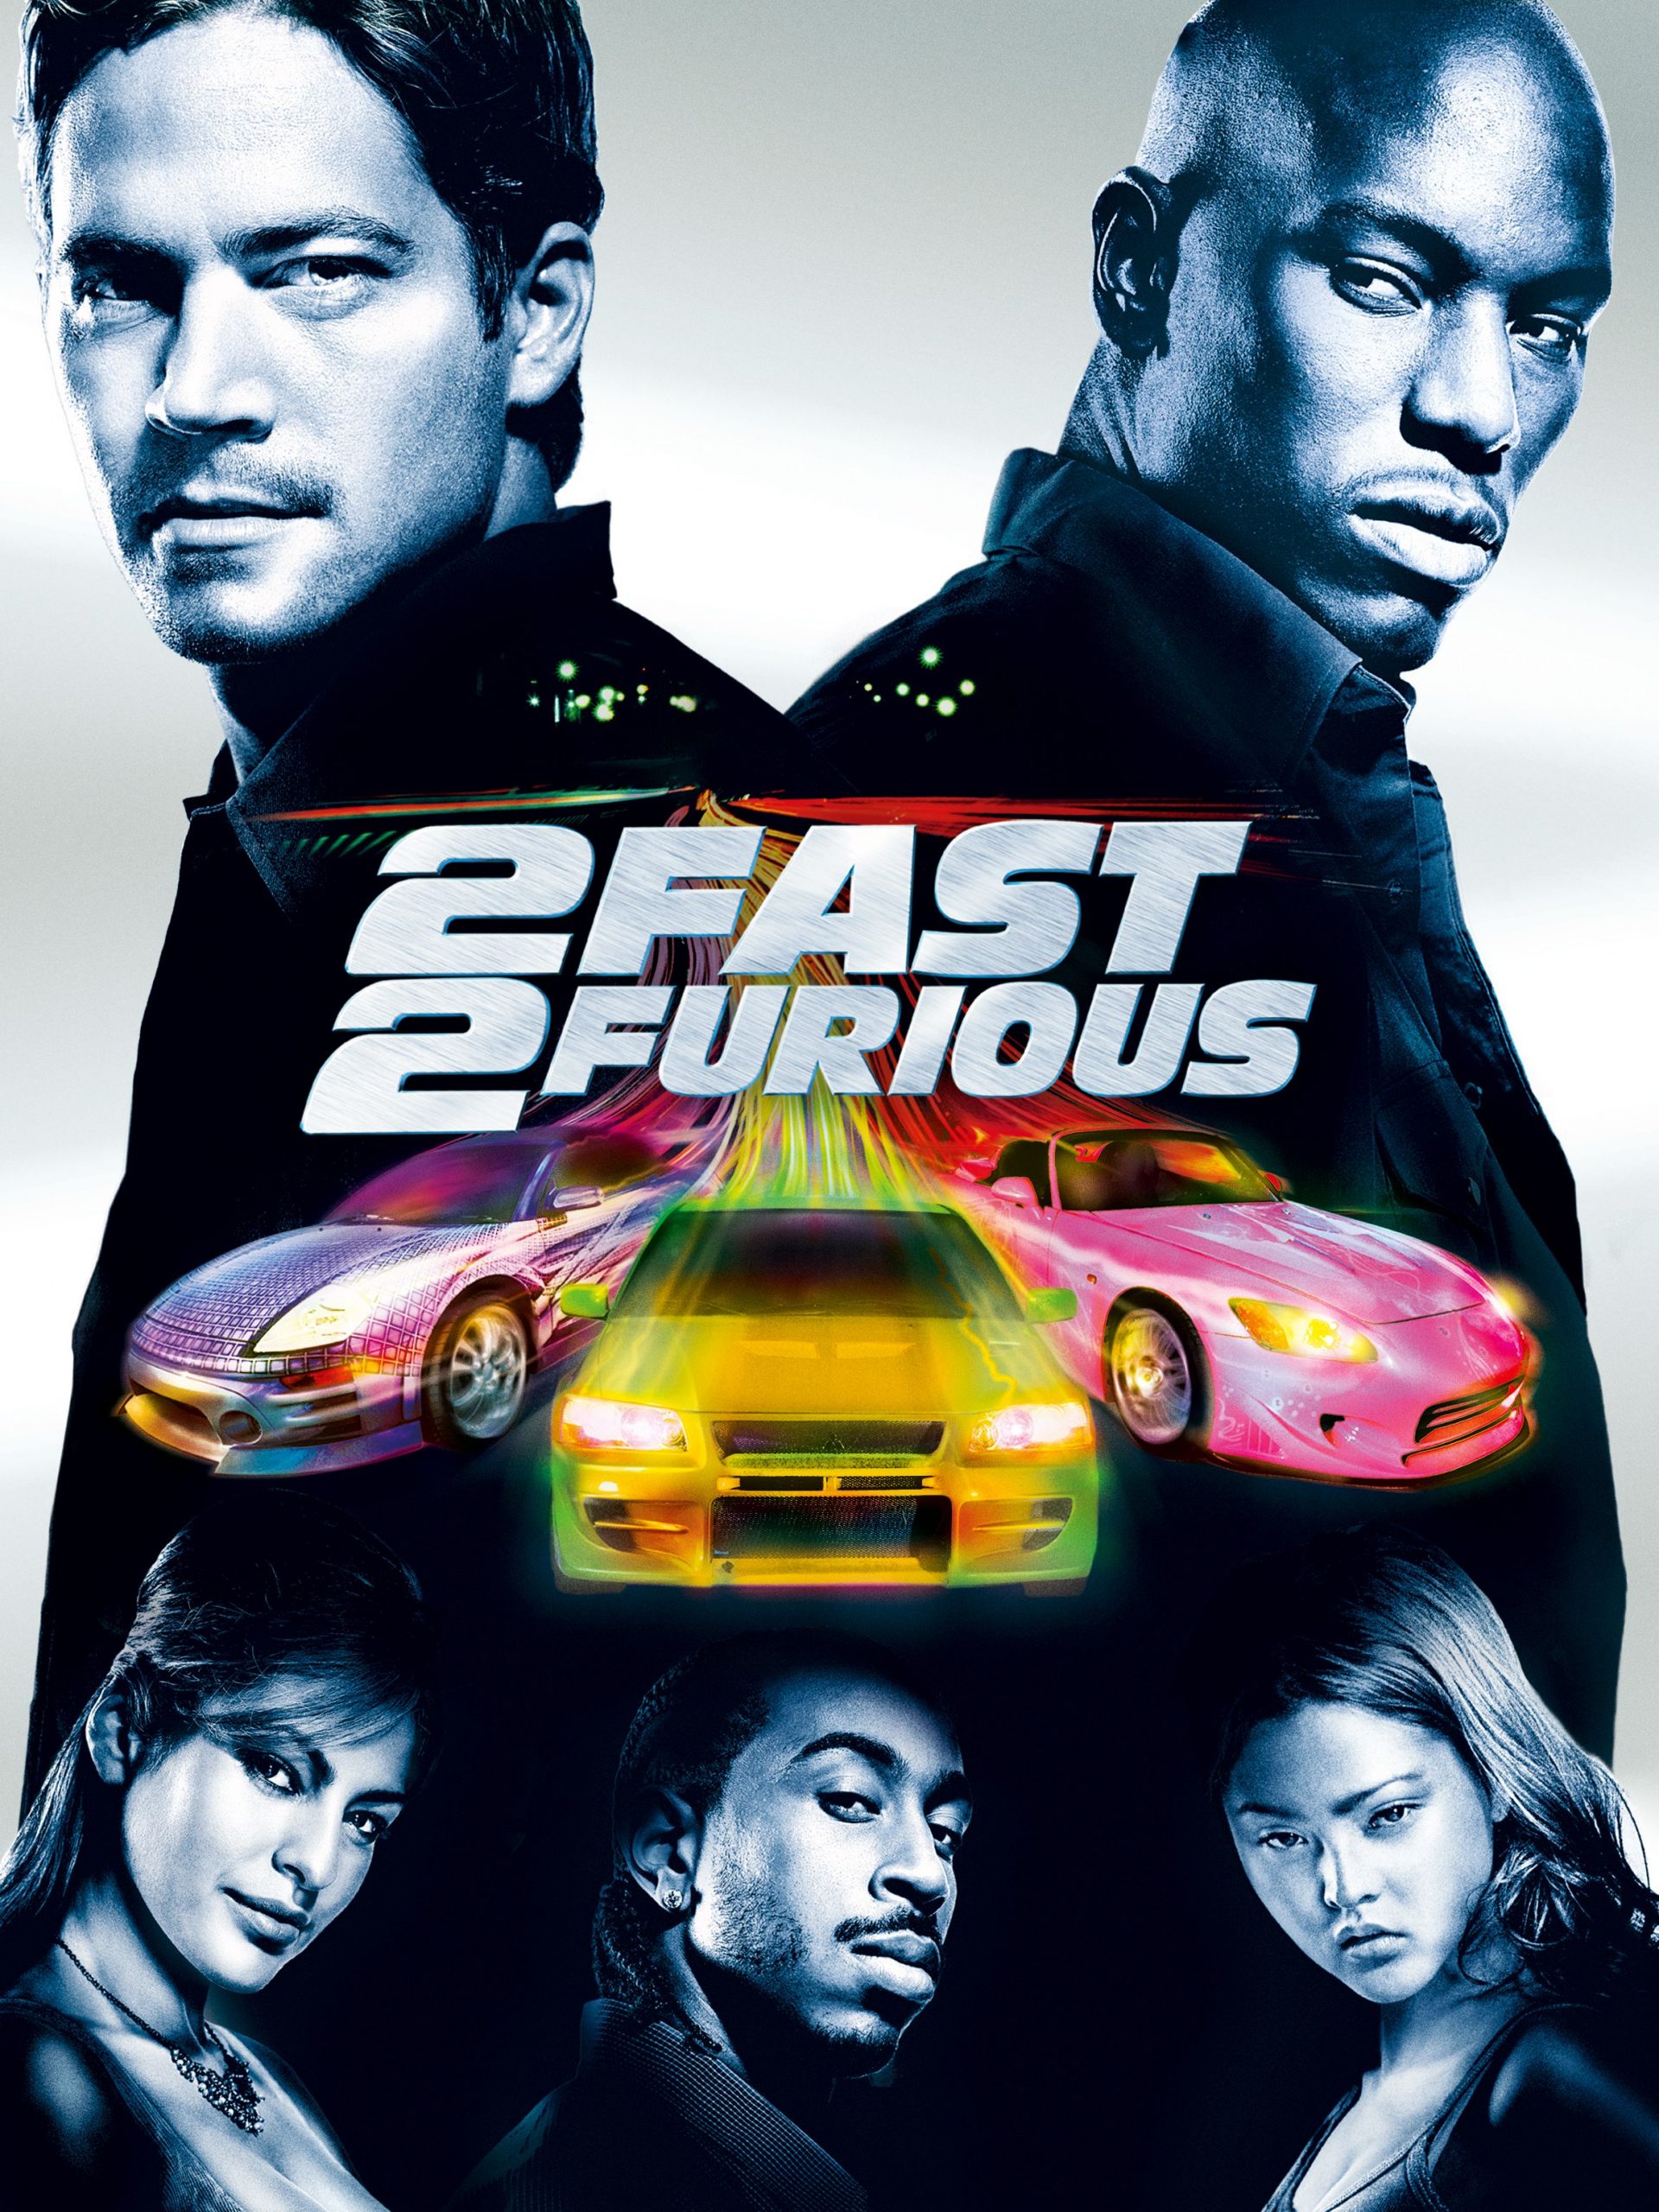 2 fast 2 furious songs free download